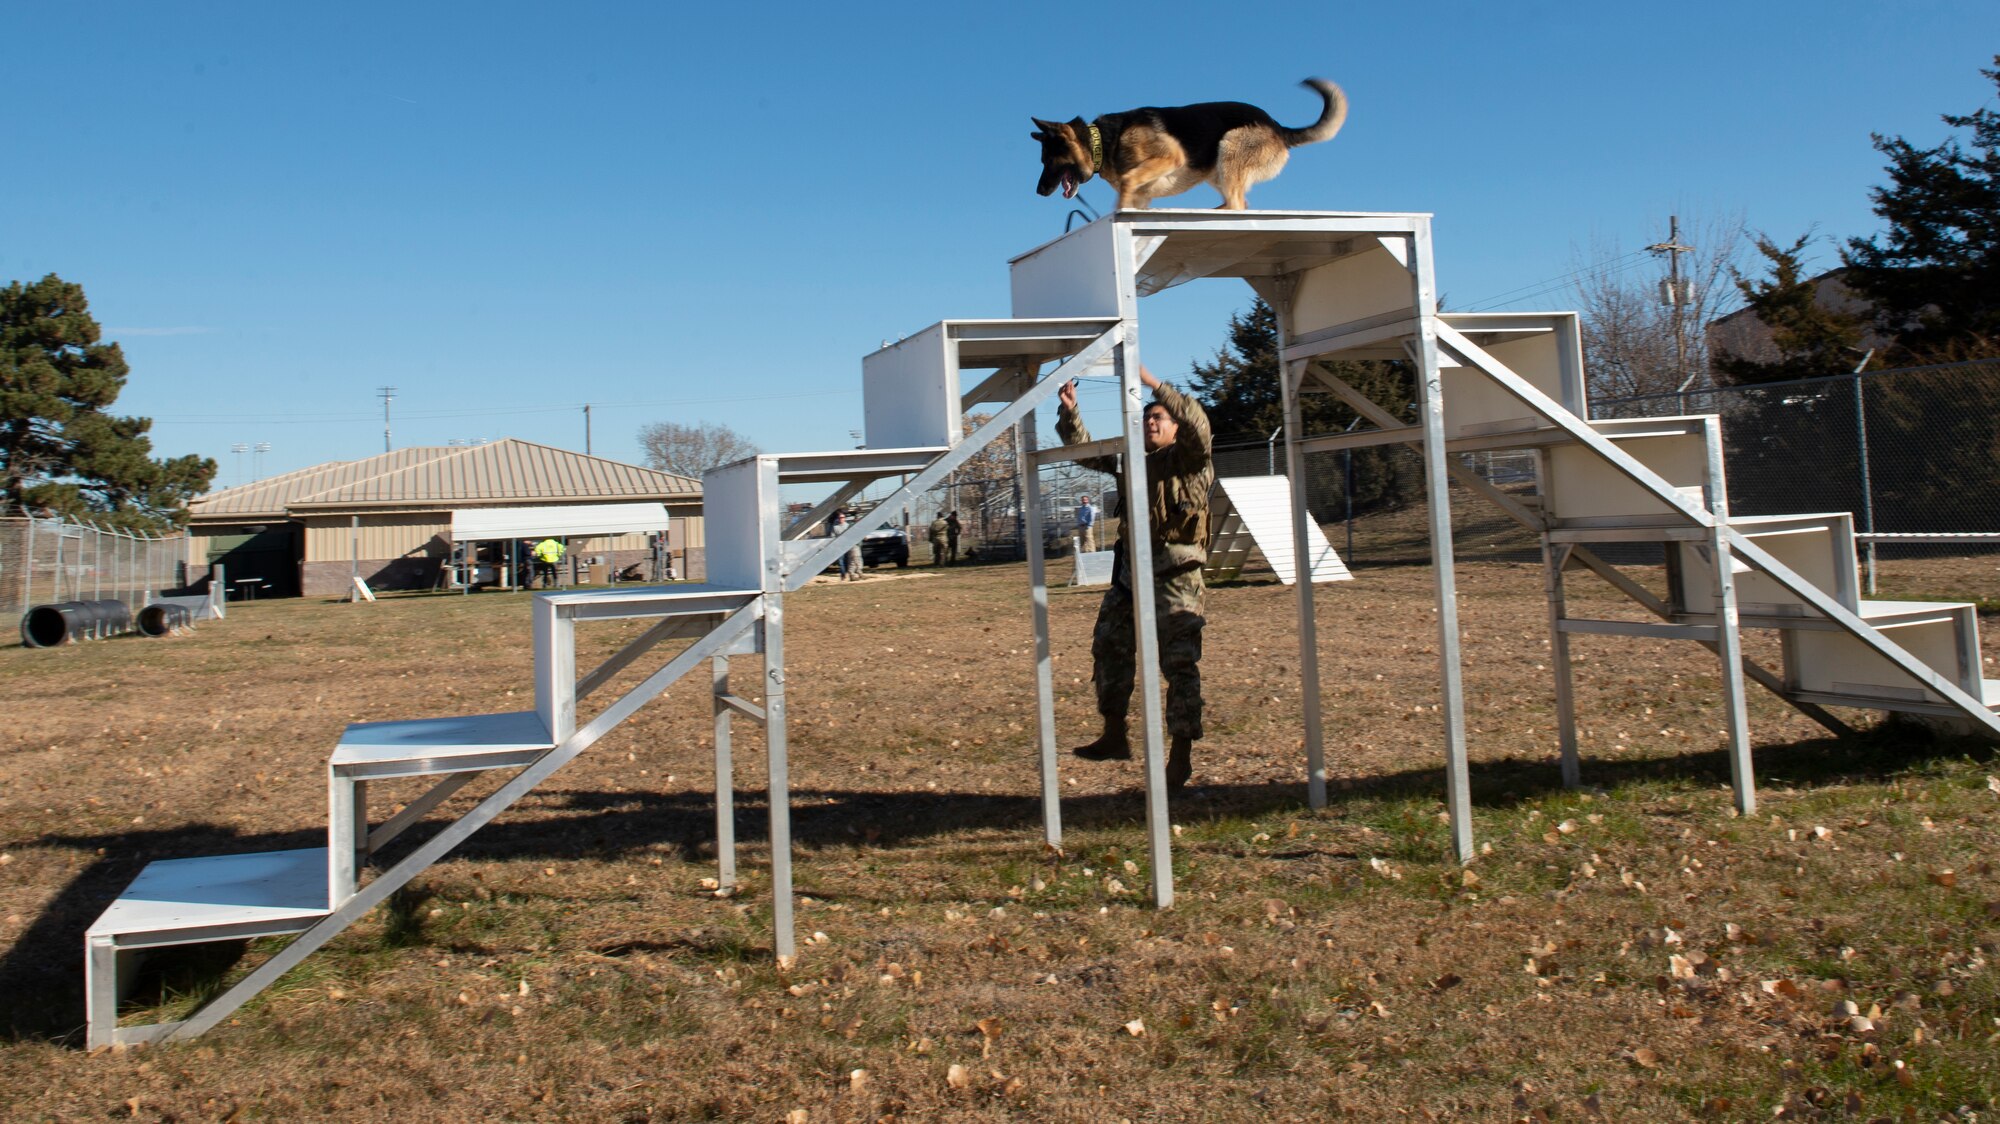 military working dog at the very top of a two sided metal staircase at an obstacle course while his dog handler is behind the staircase giving commands to the dog